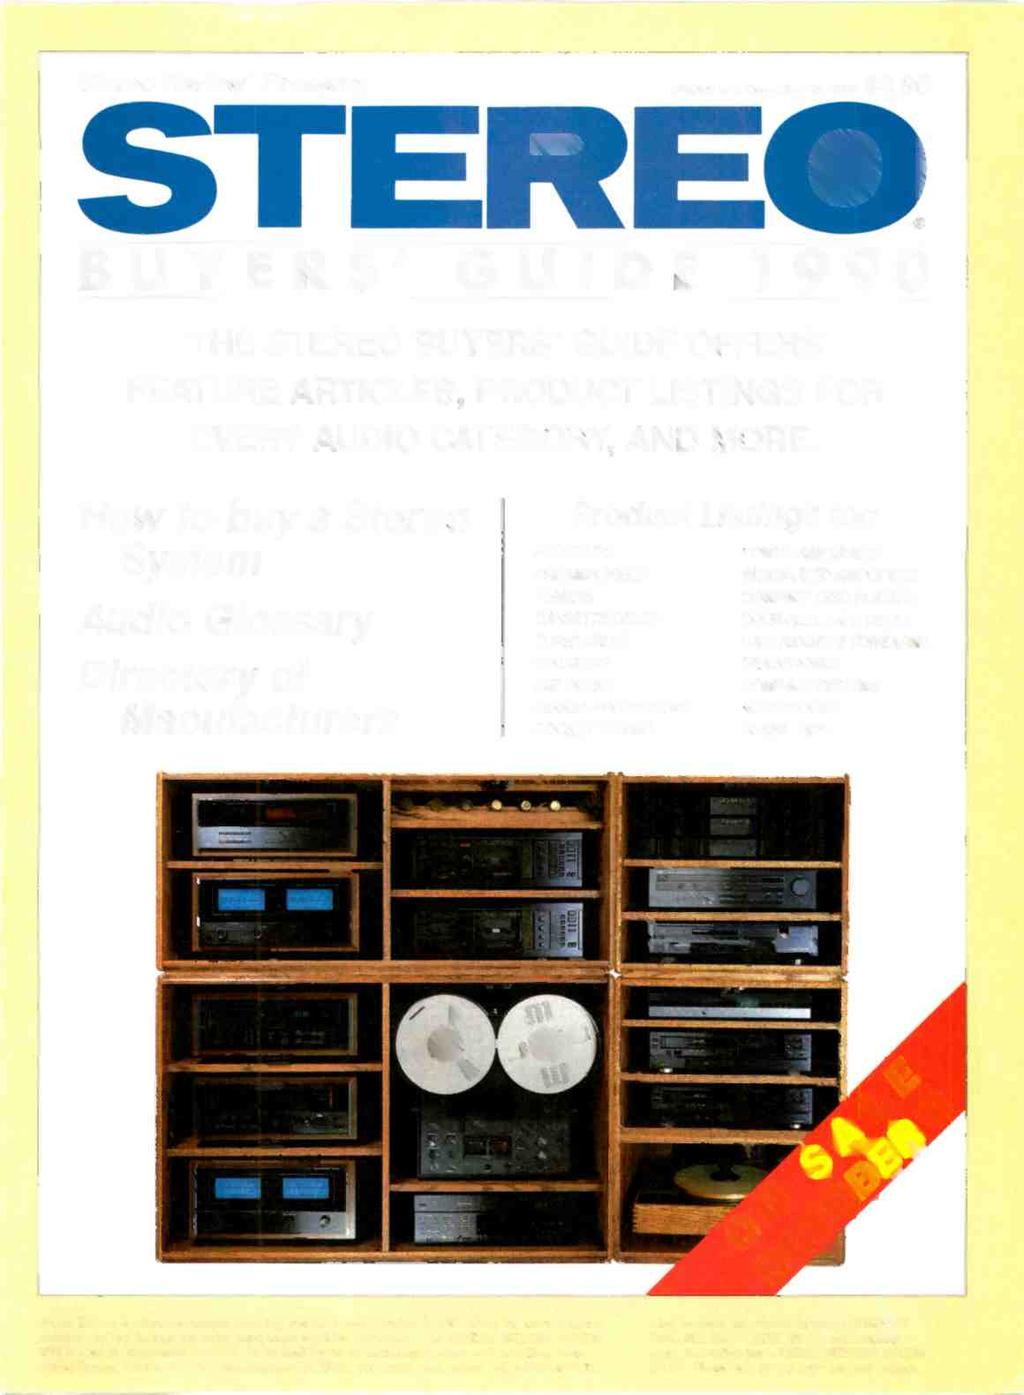 STEREO Stereo Review Presents Display until December 26, 1989 $3.